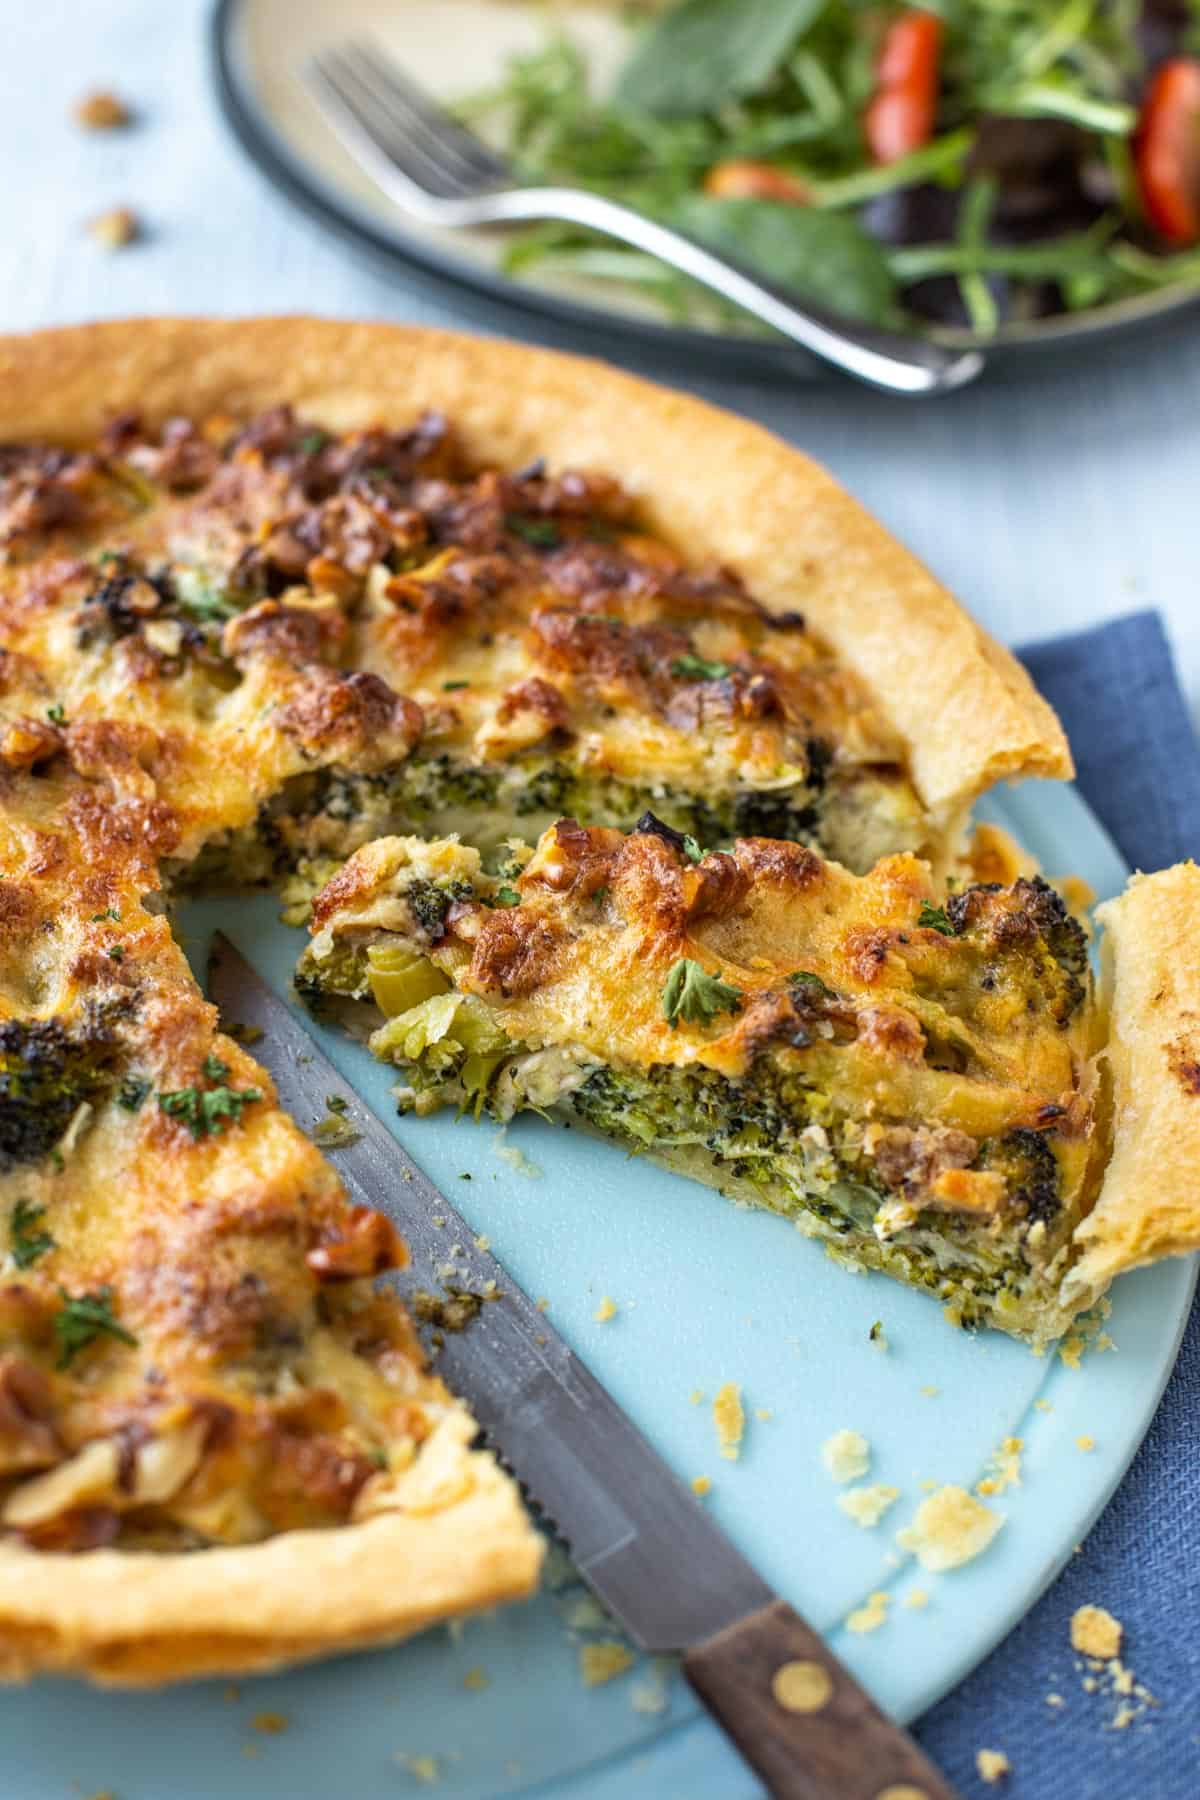 A slice being cut from a cheese and broccoli tart.